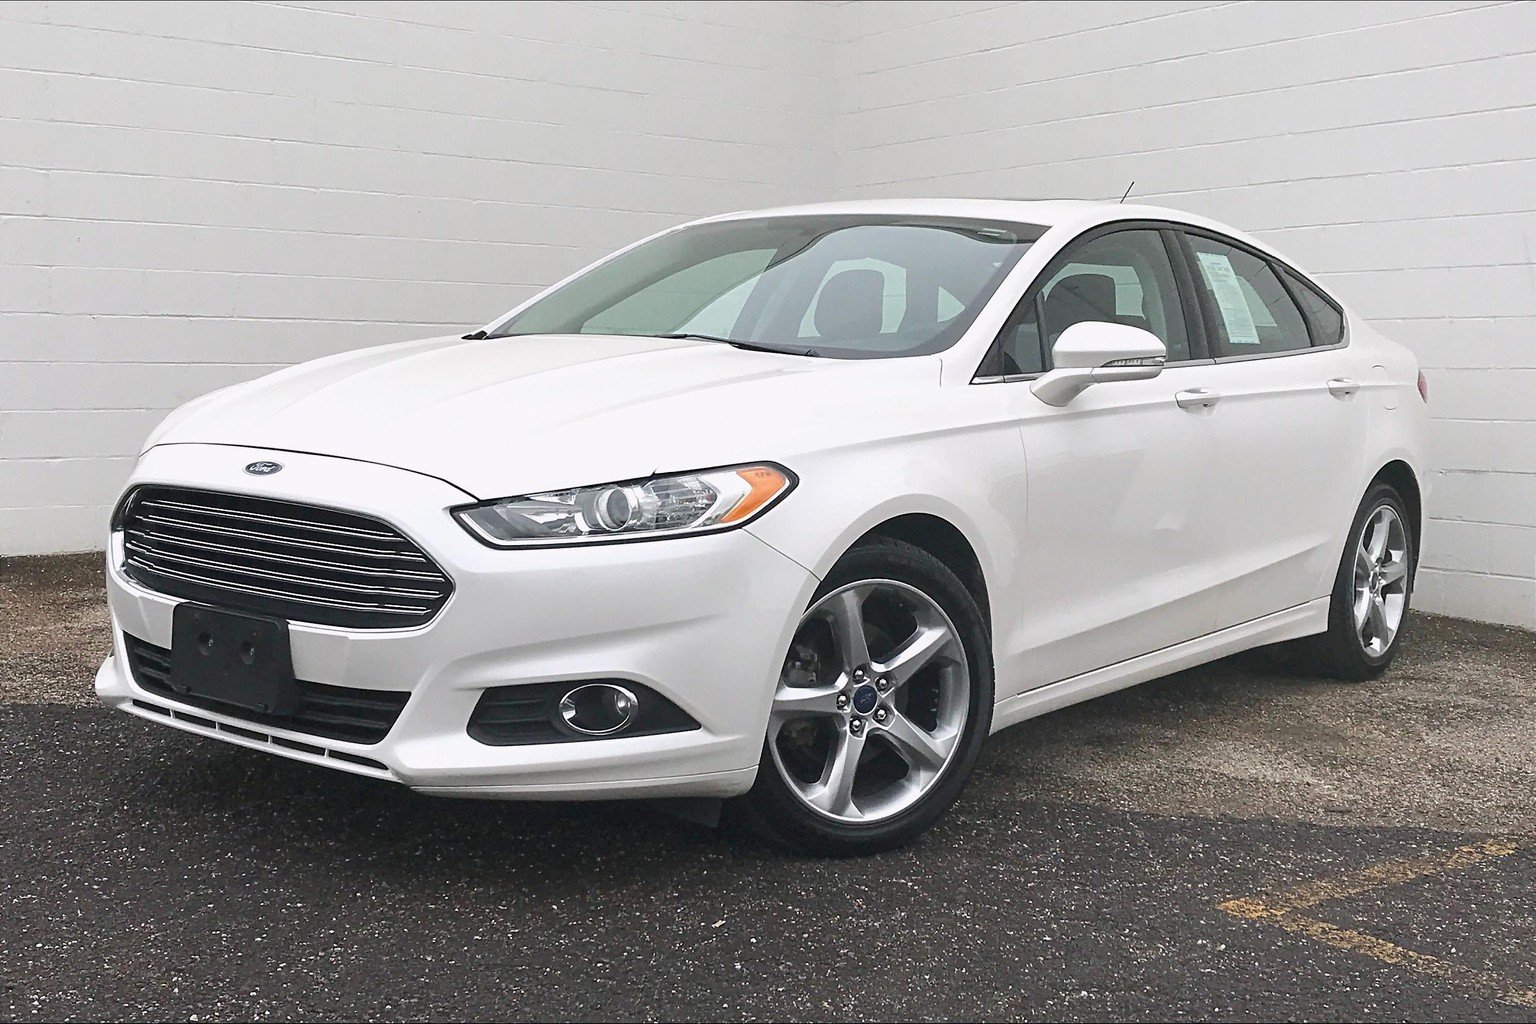 Pre-Owned 2014 Ford Fusion 4dr Sdn SE FWD 4dr Car in ...